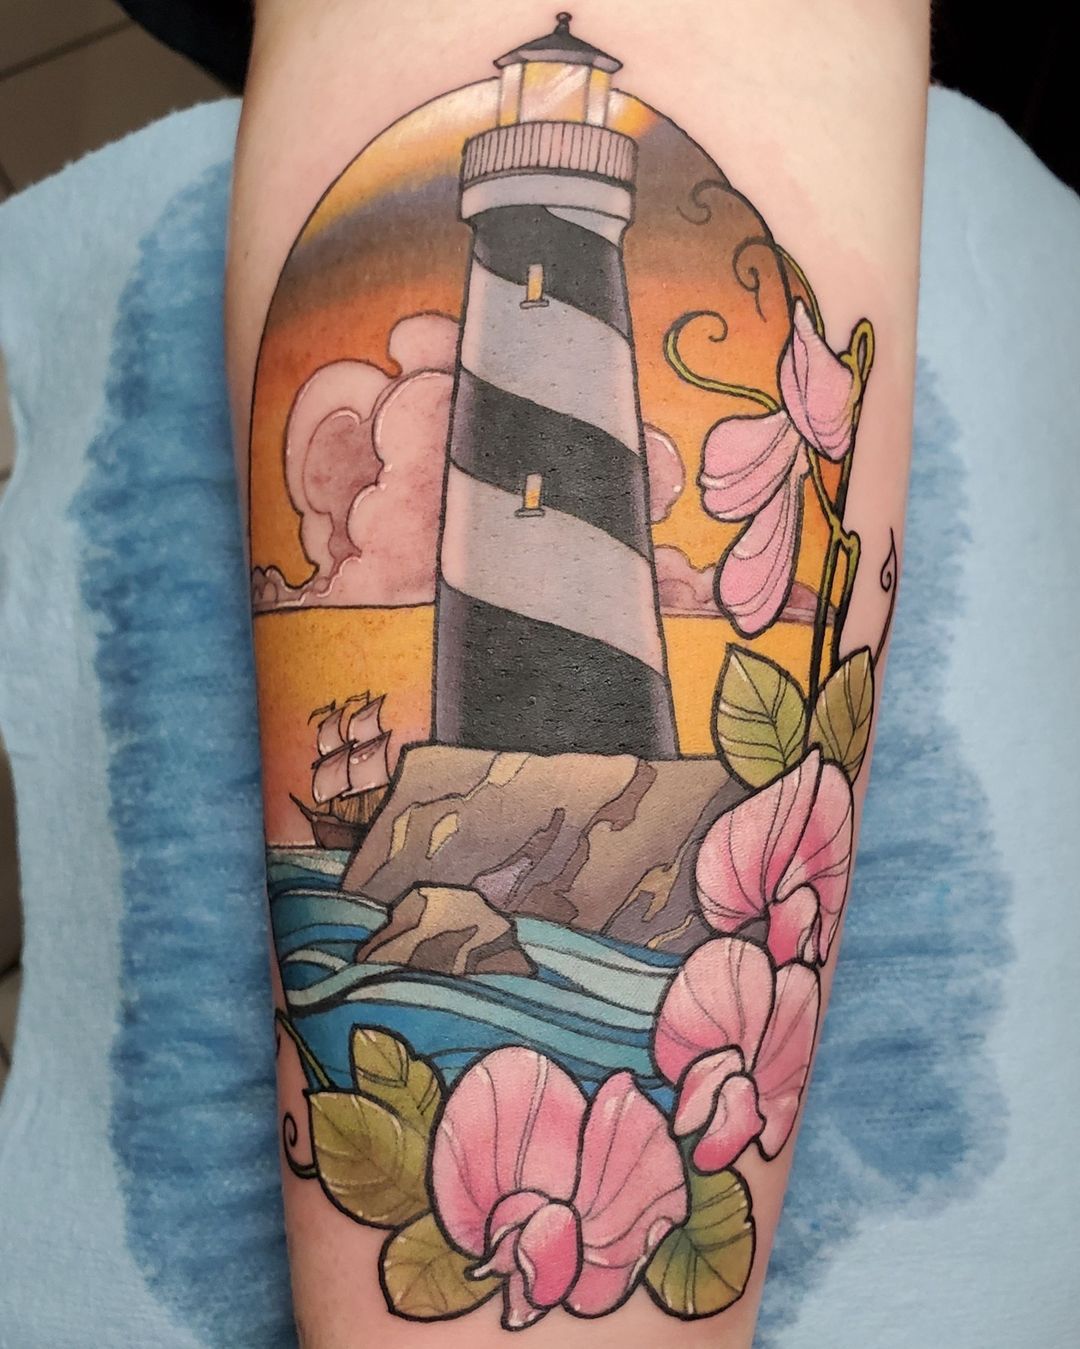 Shining Bright at Lighthouse Tattoo